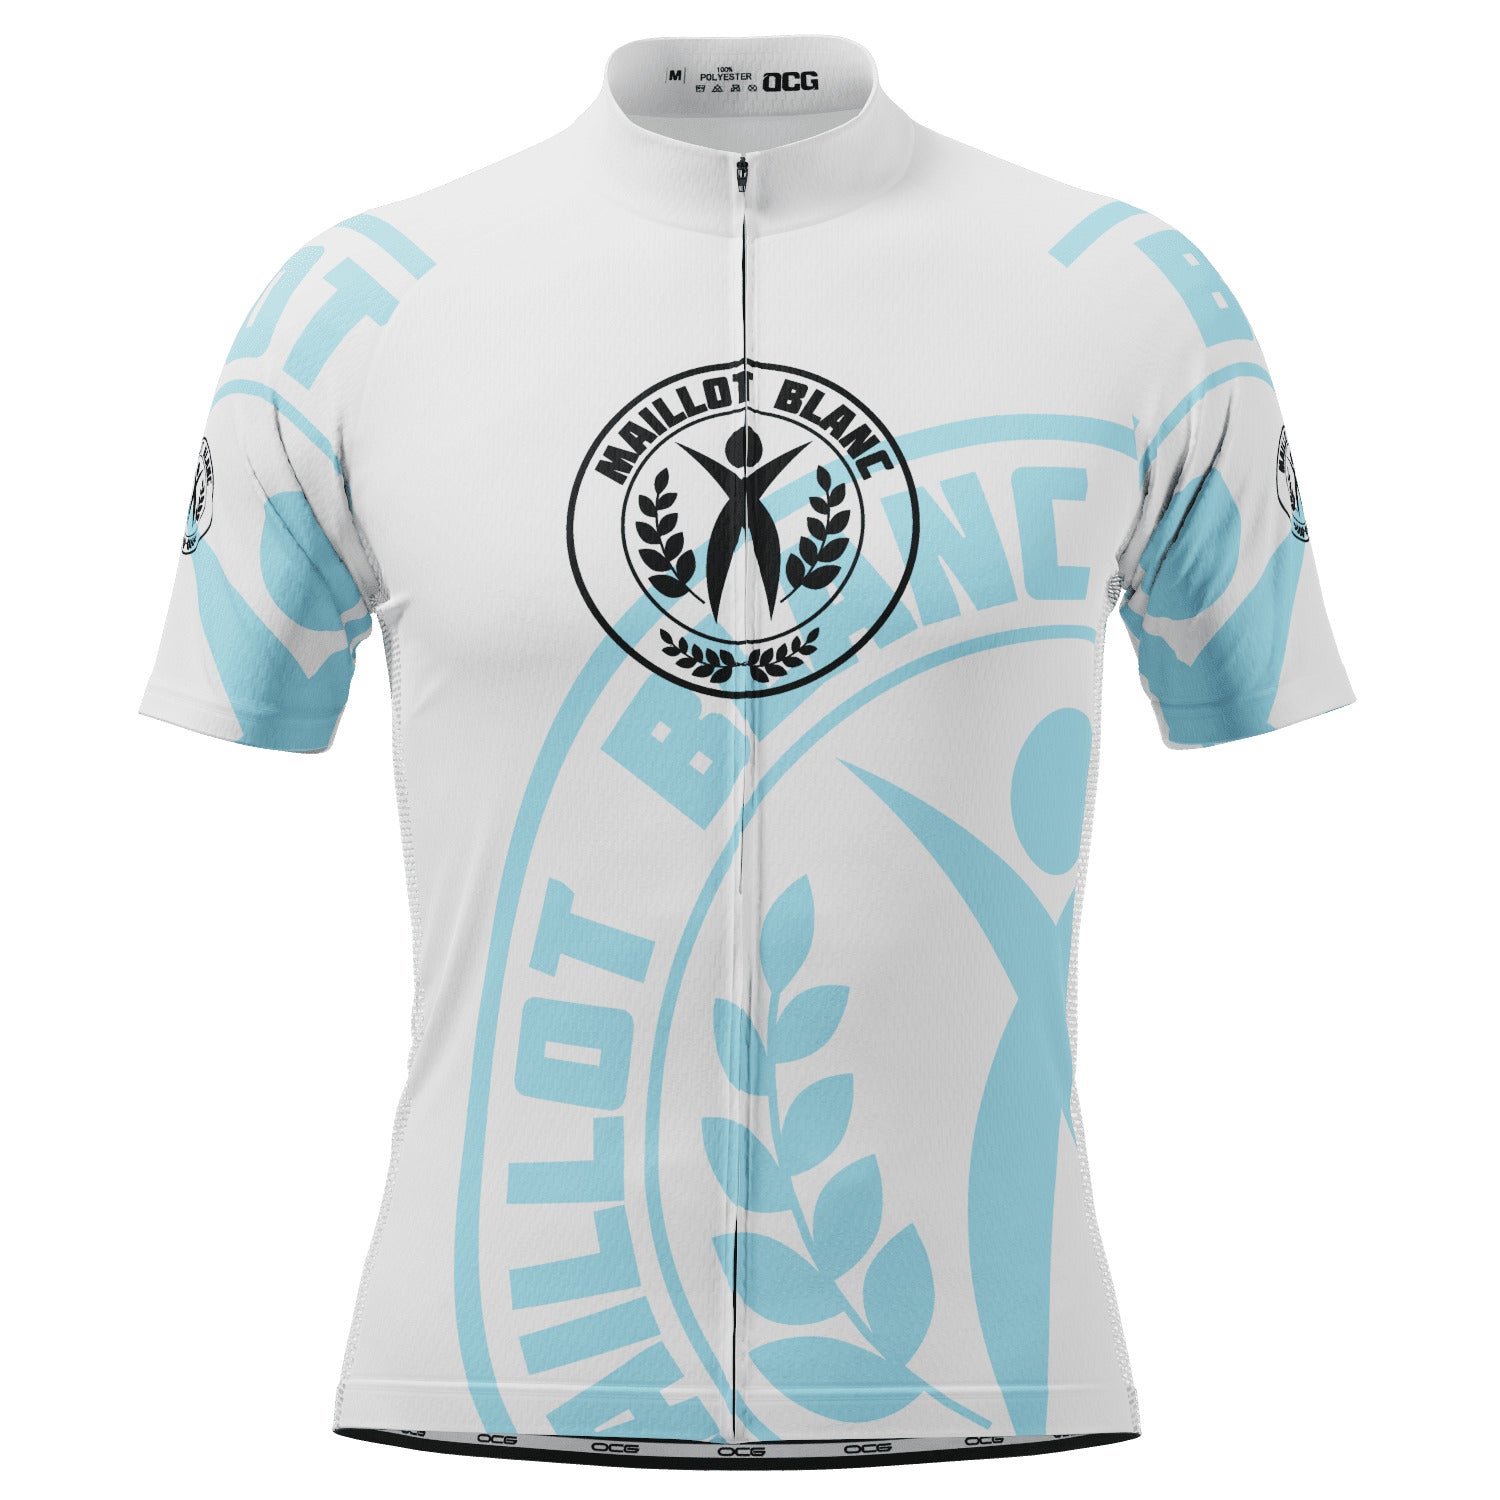 Men's Tour de France Young Rider Maillot Blanc Short Sleeve Cycling Jersey